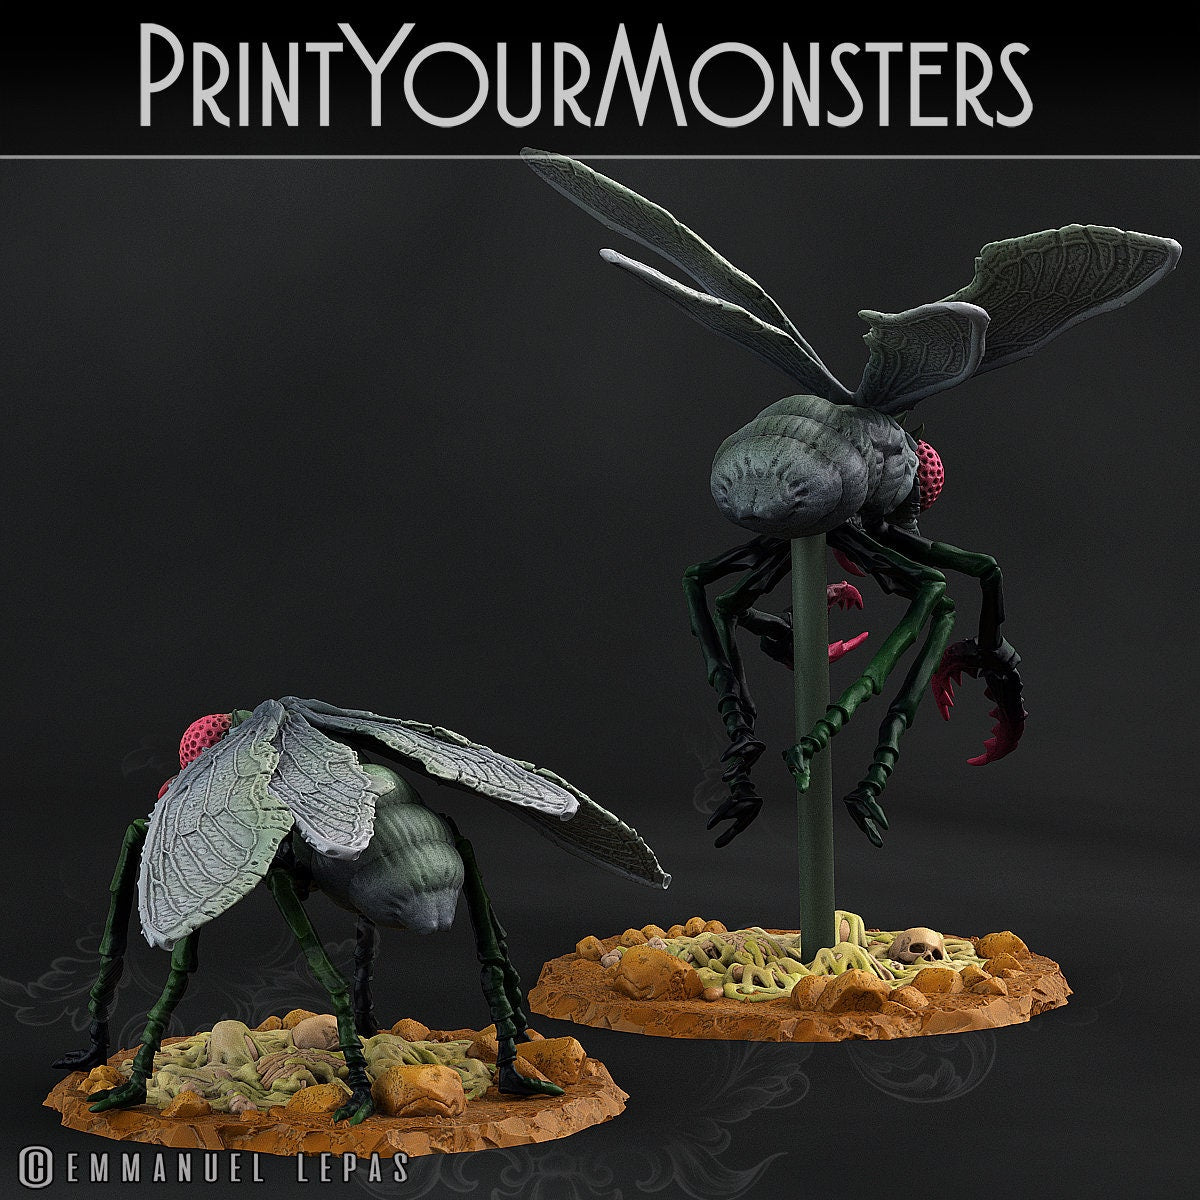 Giant Flys - Print Your Monsters 